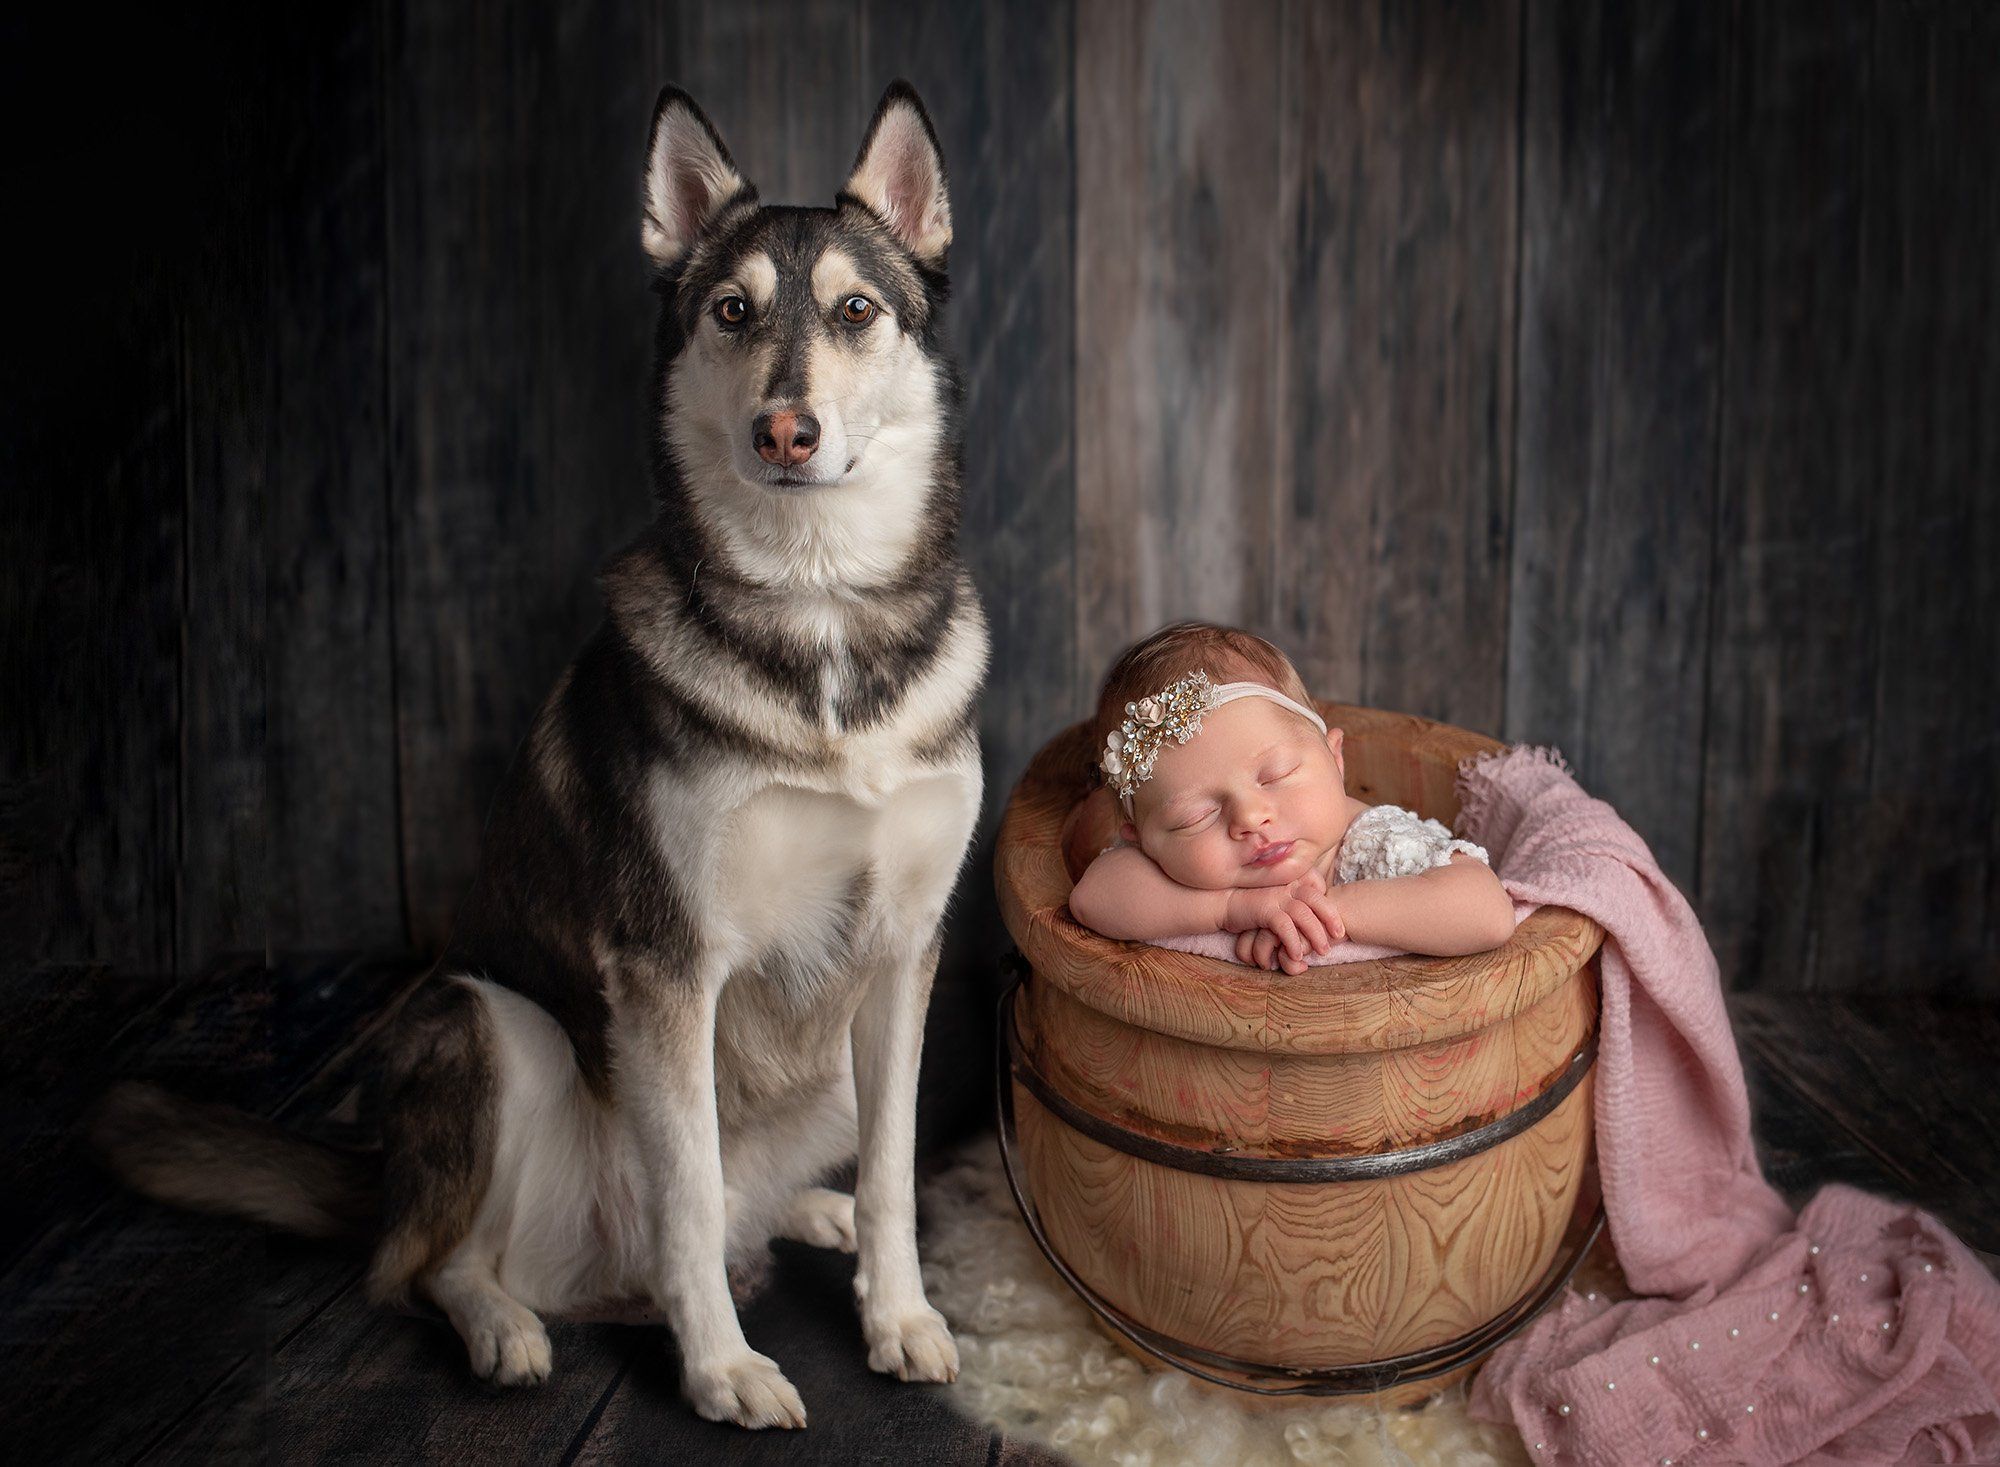 newborn sleeping in barrel next to husky with a wood background